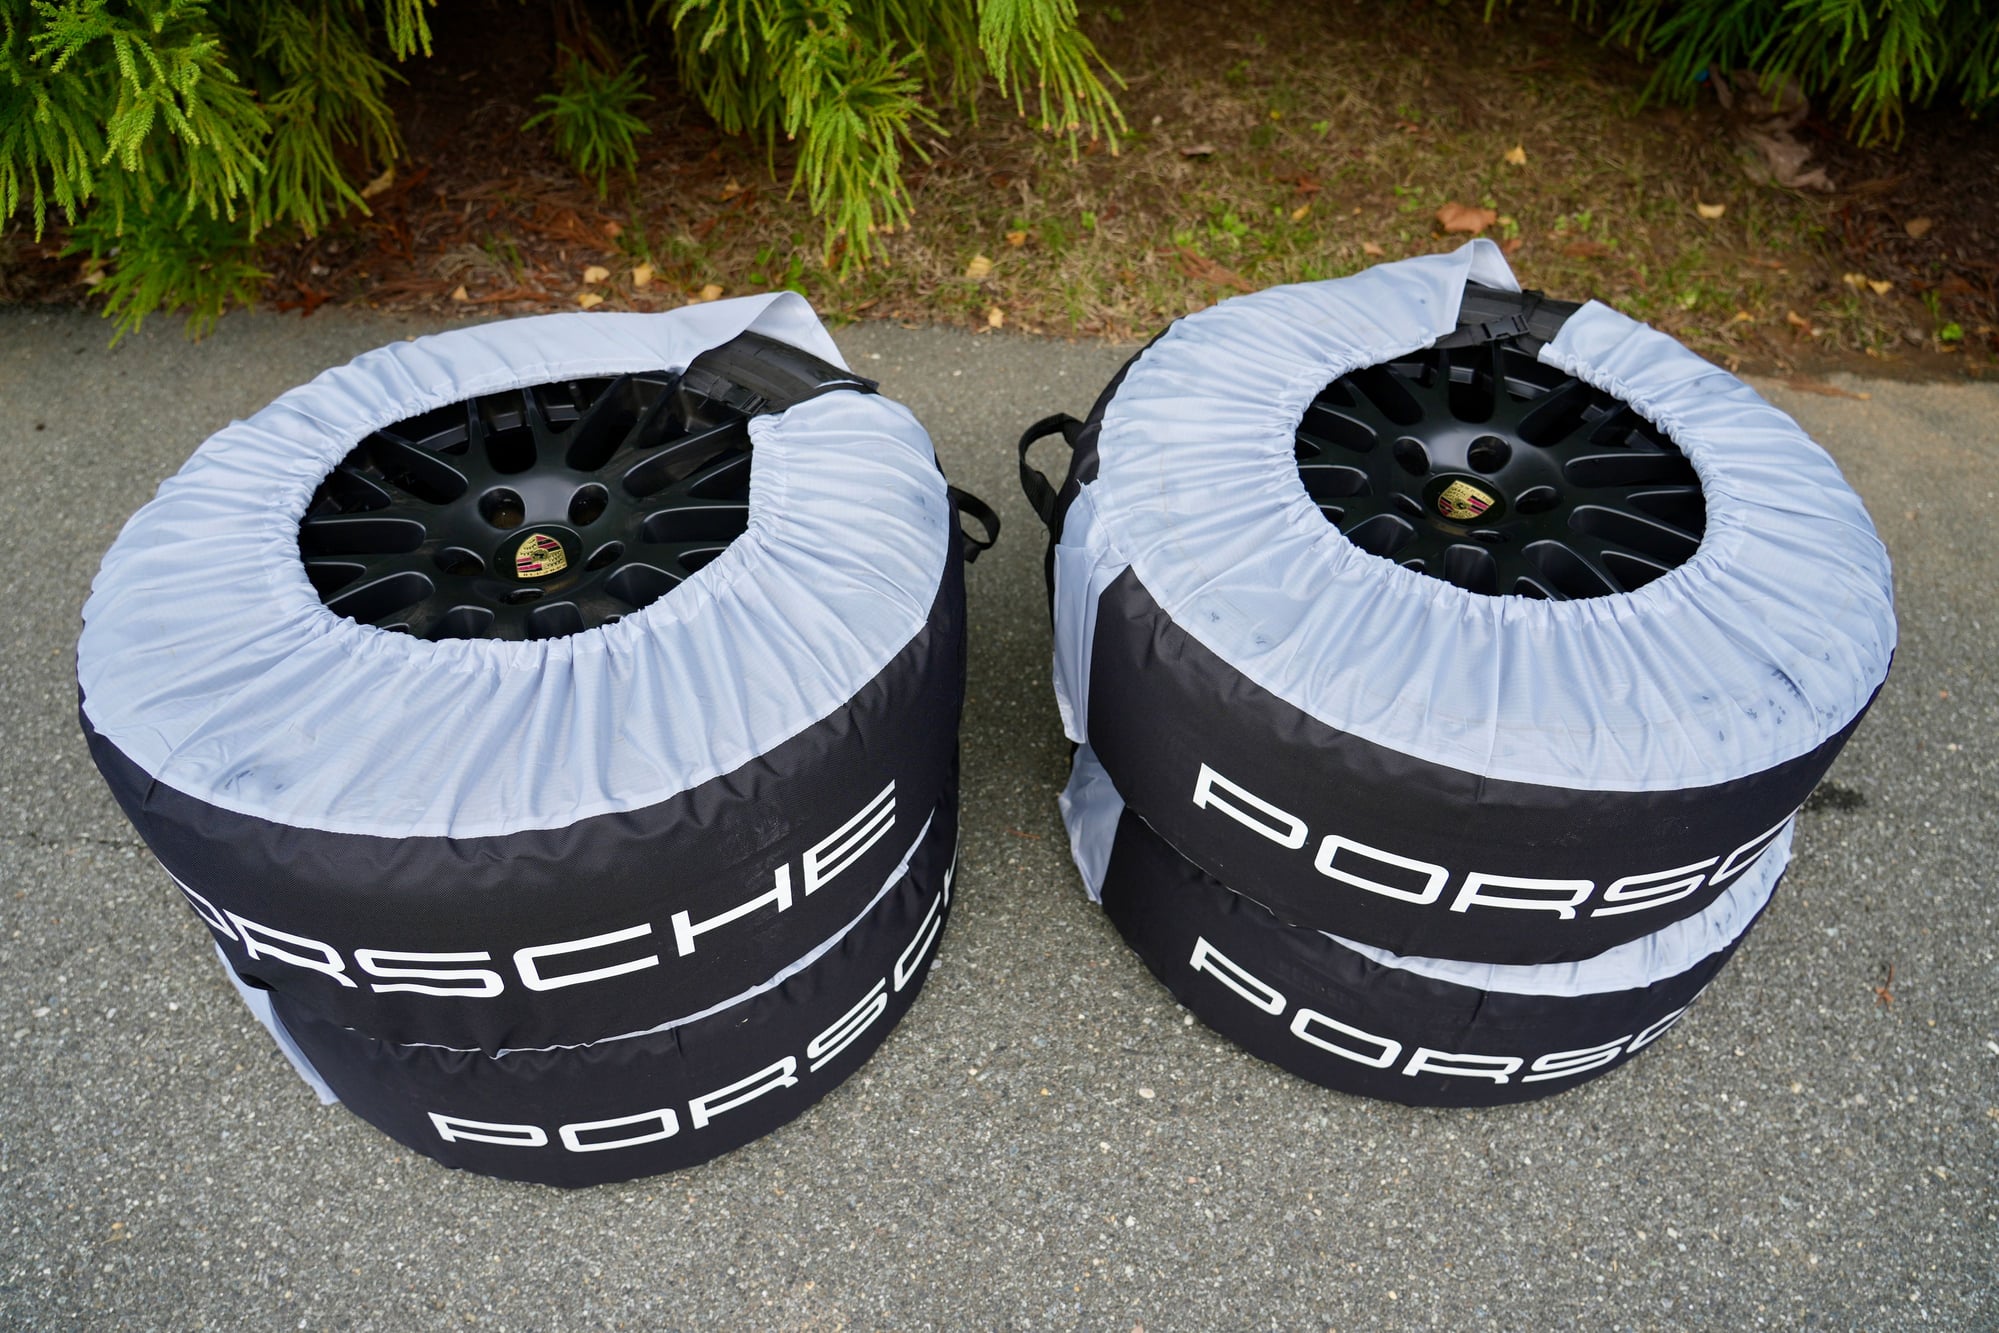 Wheels and Tires/Axles - 20" RS Spyder with Pirelli Scorpion AS plus 3 - Used - 2016 to 2018 Porsche Cayenne - Silver Spring, MD 20906, United States